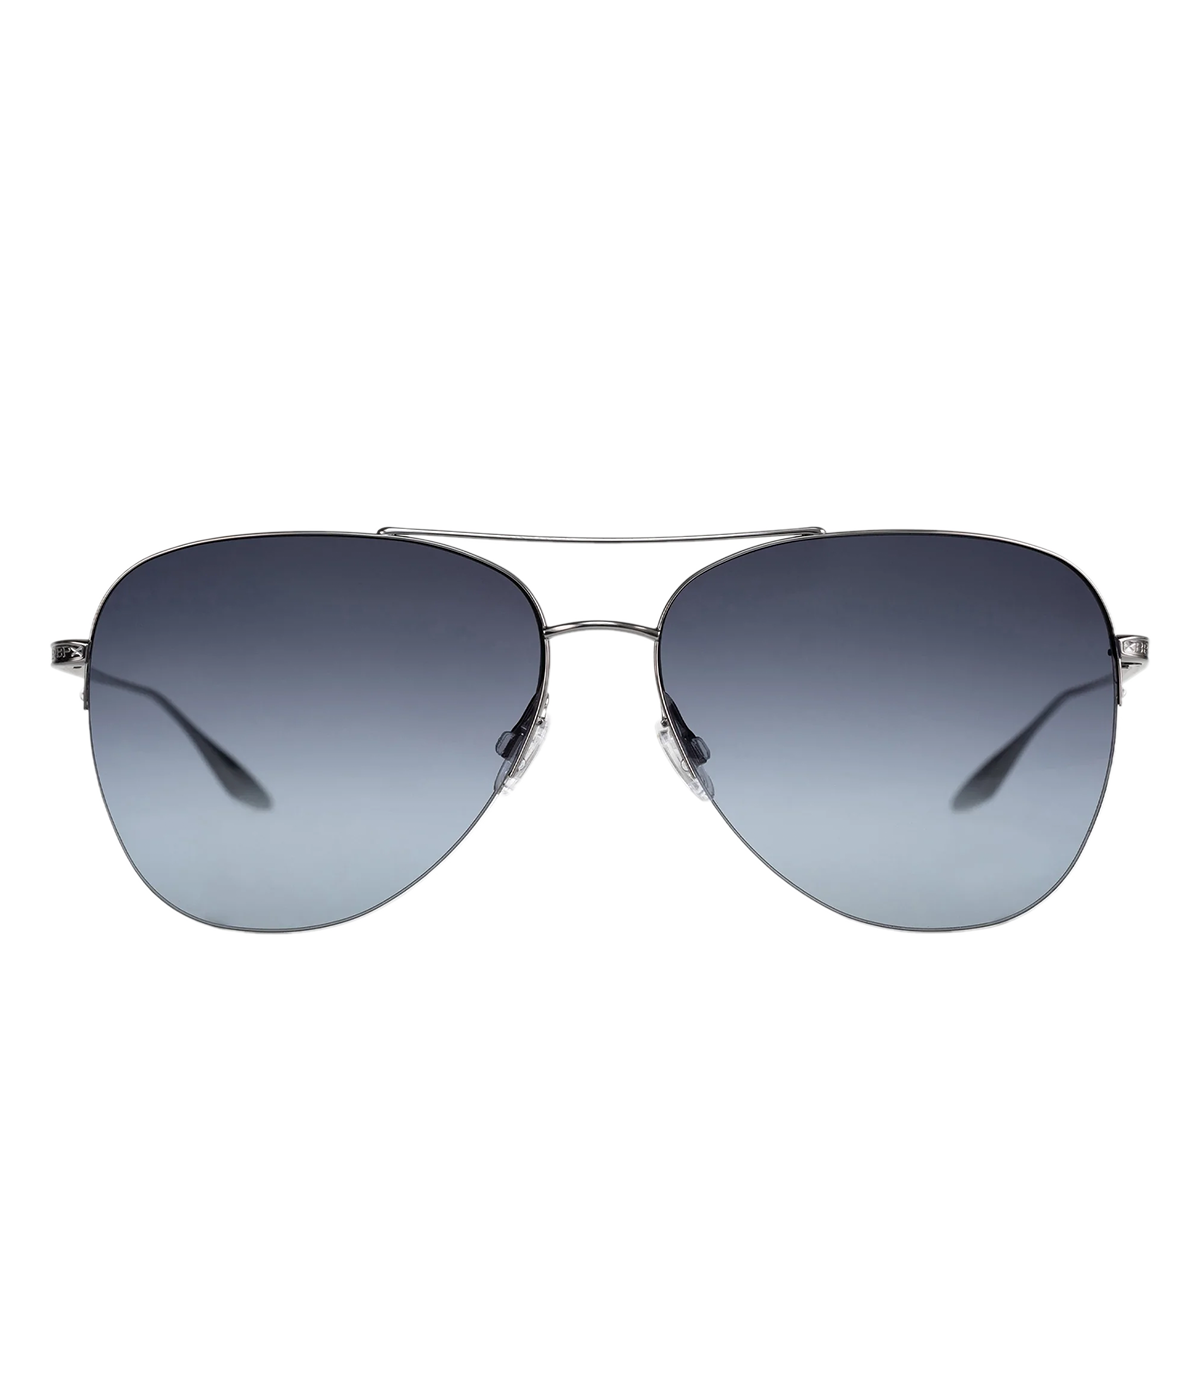 Image of an aviator style sunglass, with silver metal hardware and black gradient lenses. Featuring a intricate filigree etching at the double bridge and signature Barton Perreira engraving at the temples.